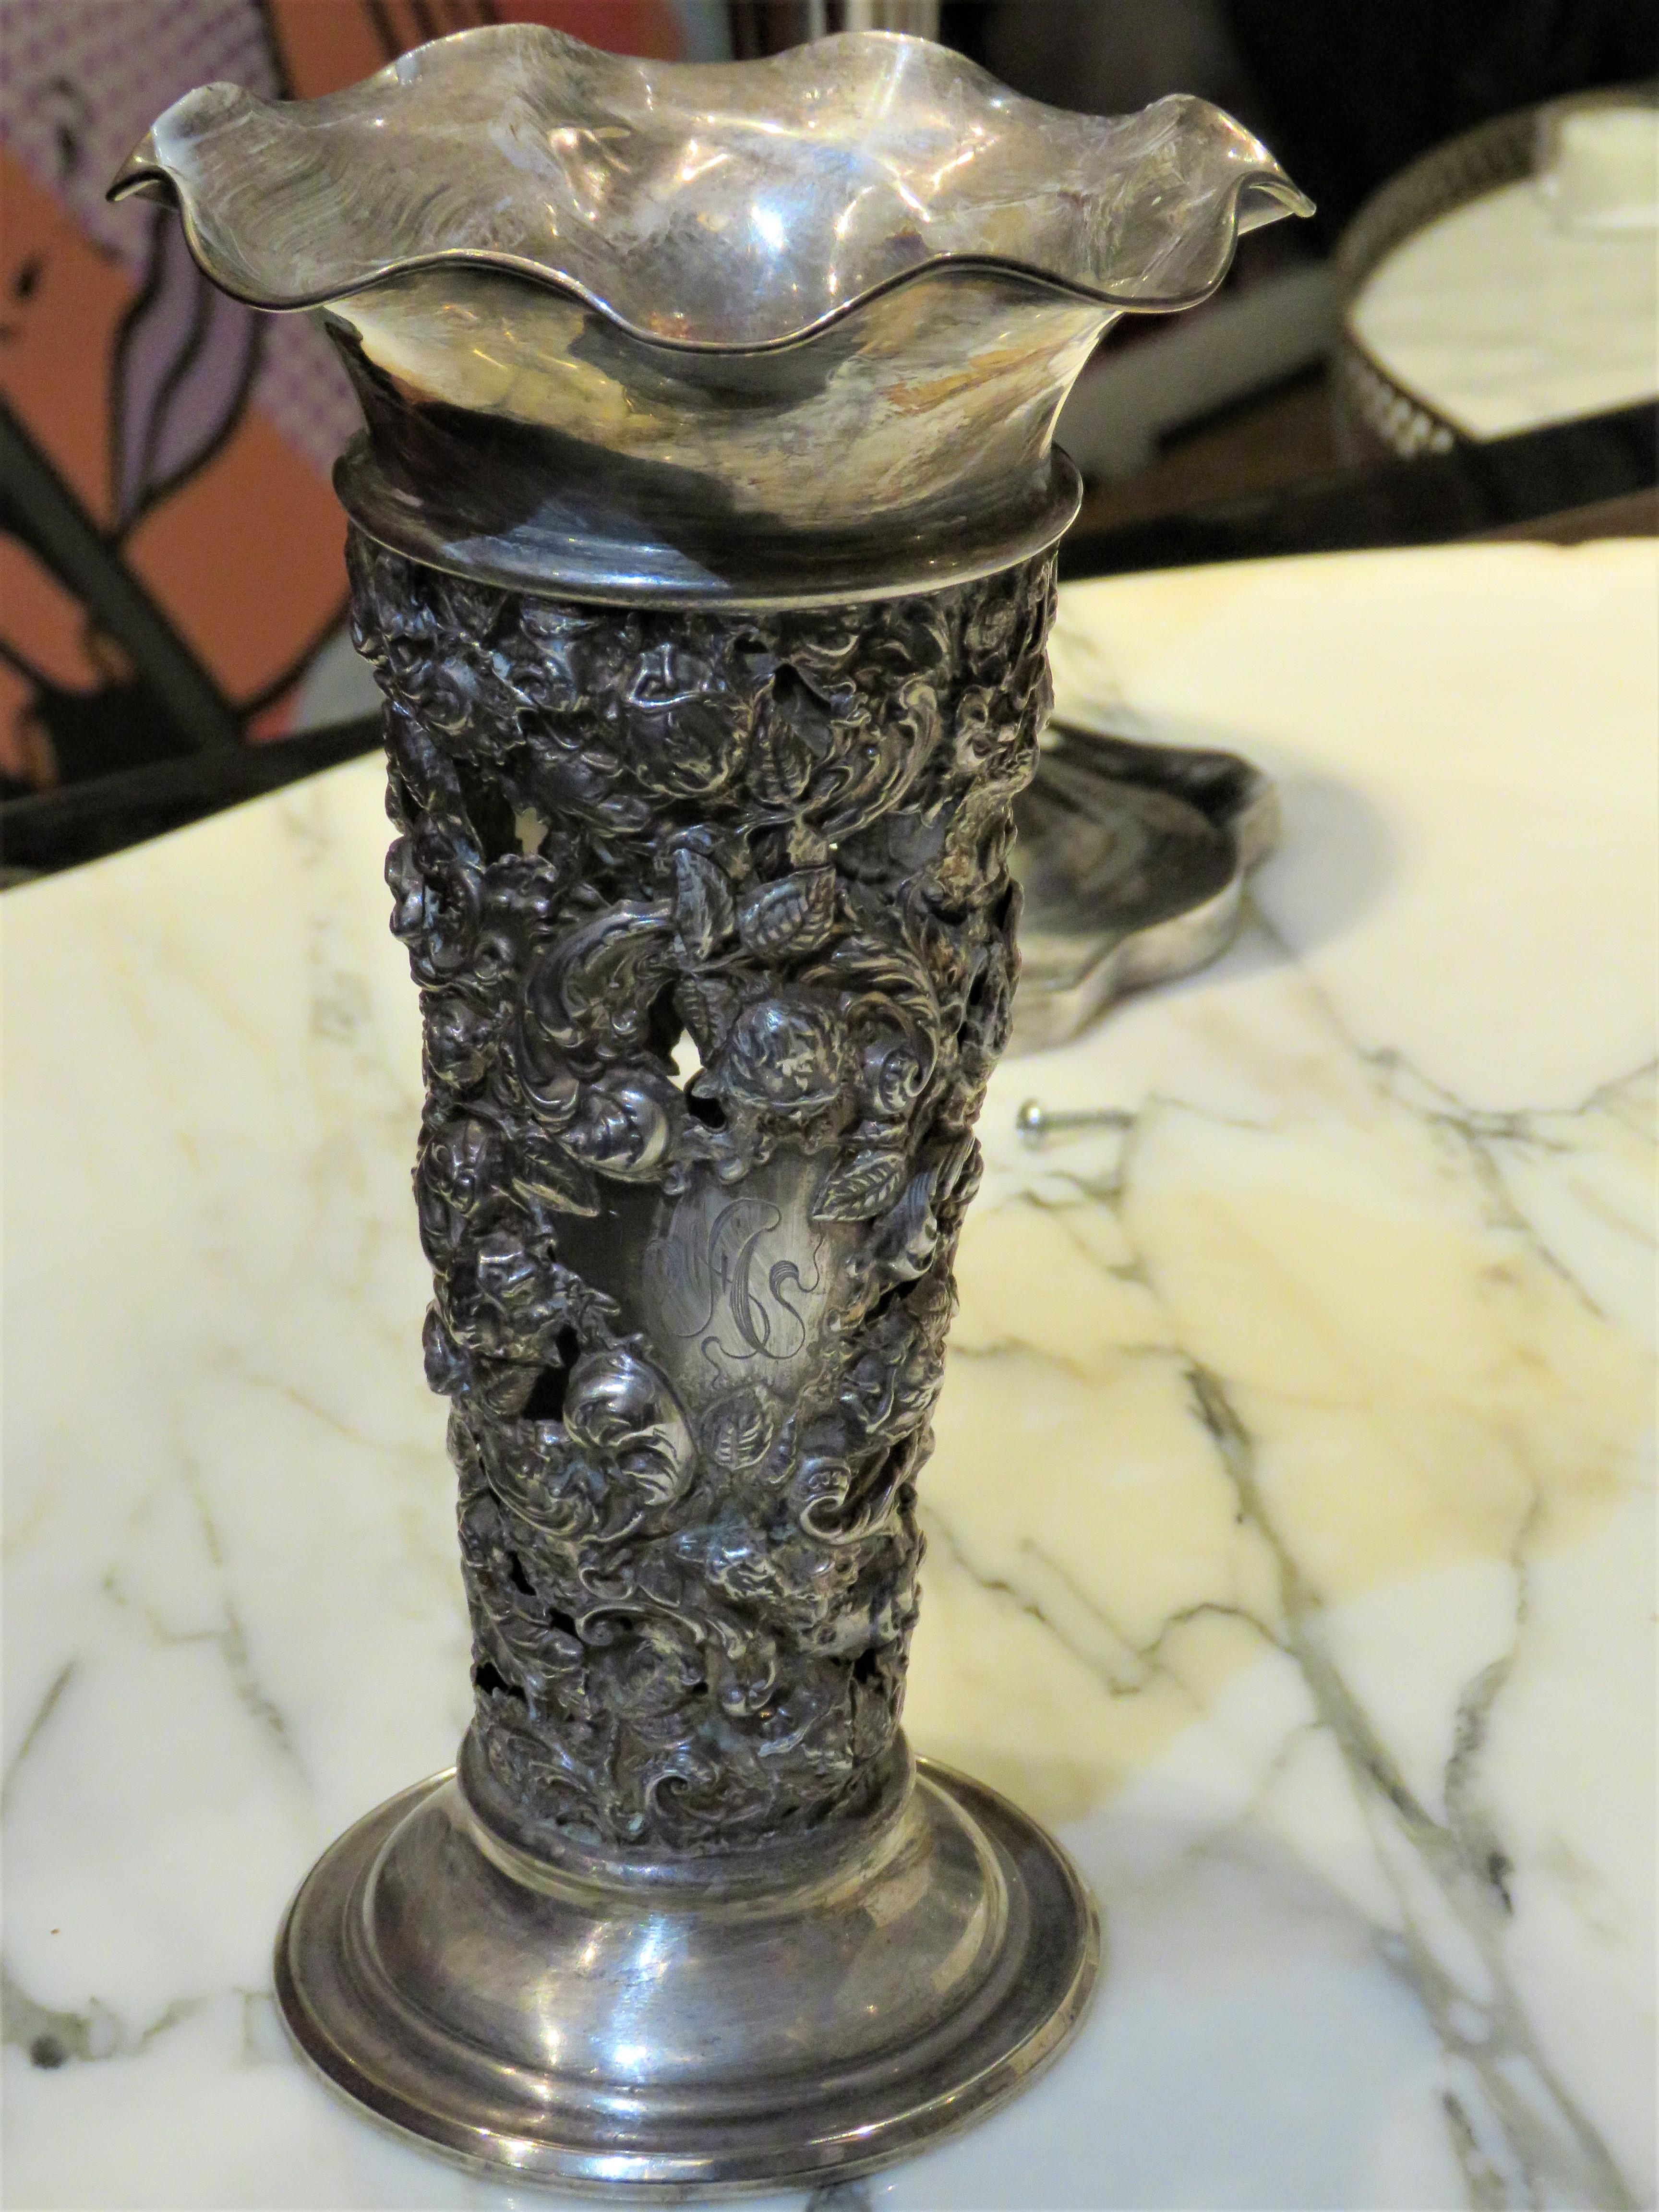 The Following Item we are offering is a Rare Monumental 19th Century. Sterling Silver Vase having foliate and scrollwork repousse decoration throughout. Base marked Sterling 7 inches on bottom. Taken out of a Six Million Dollar New York Estate. A